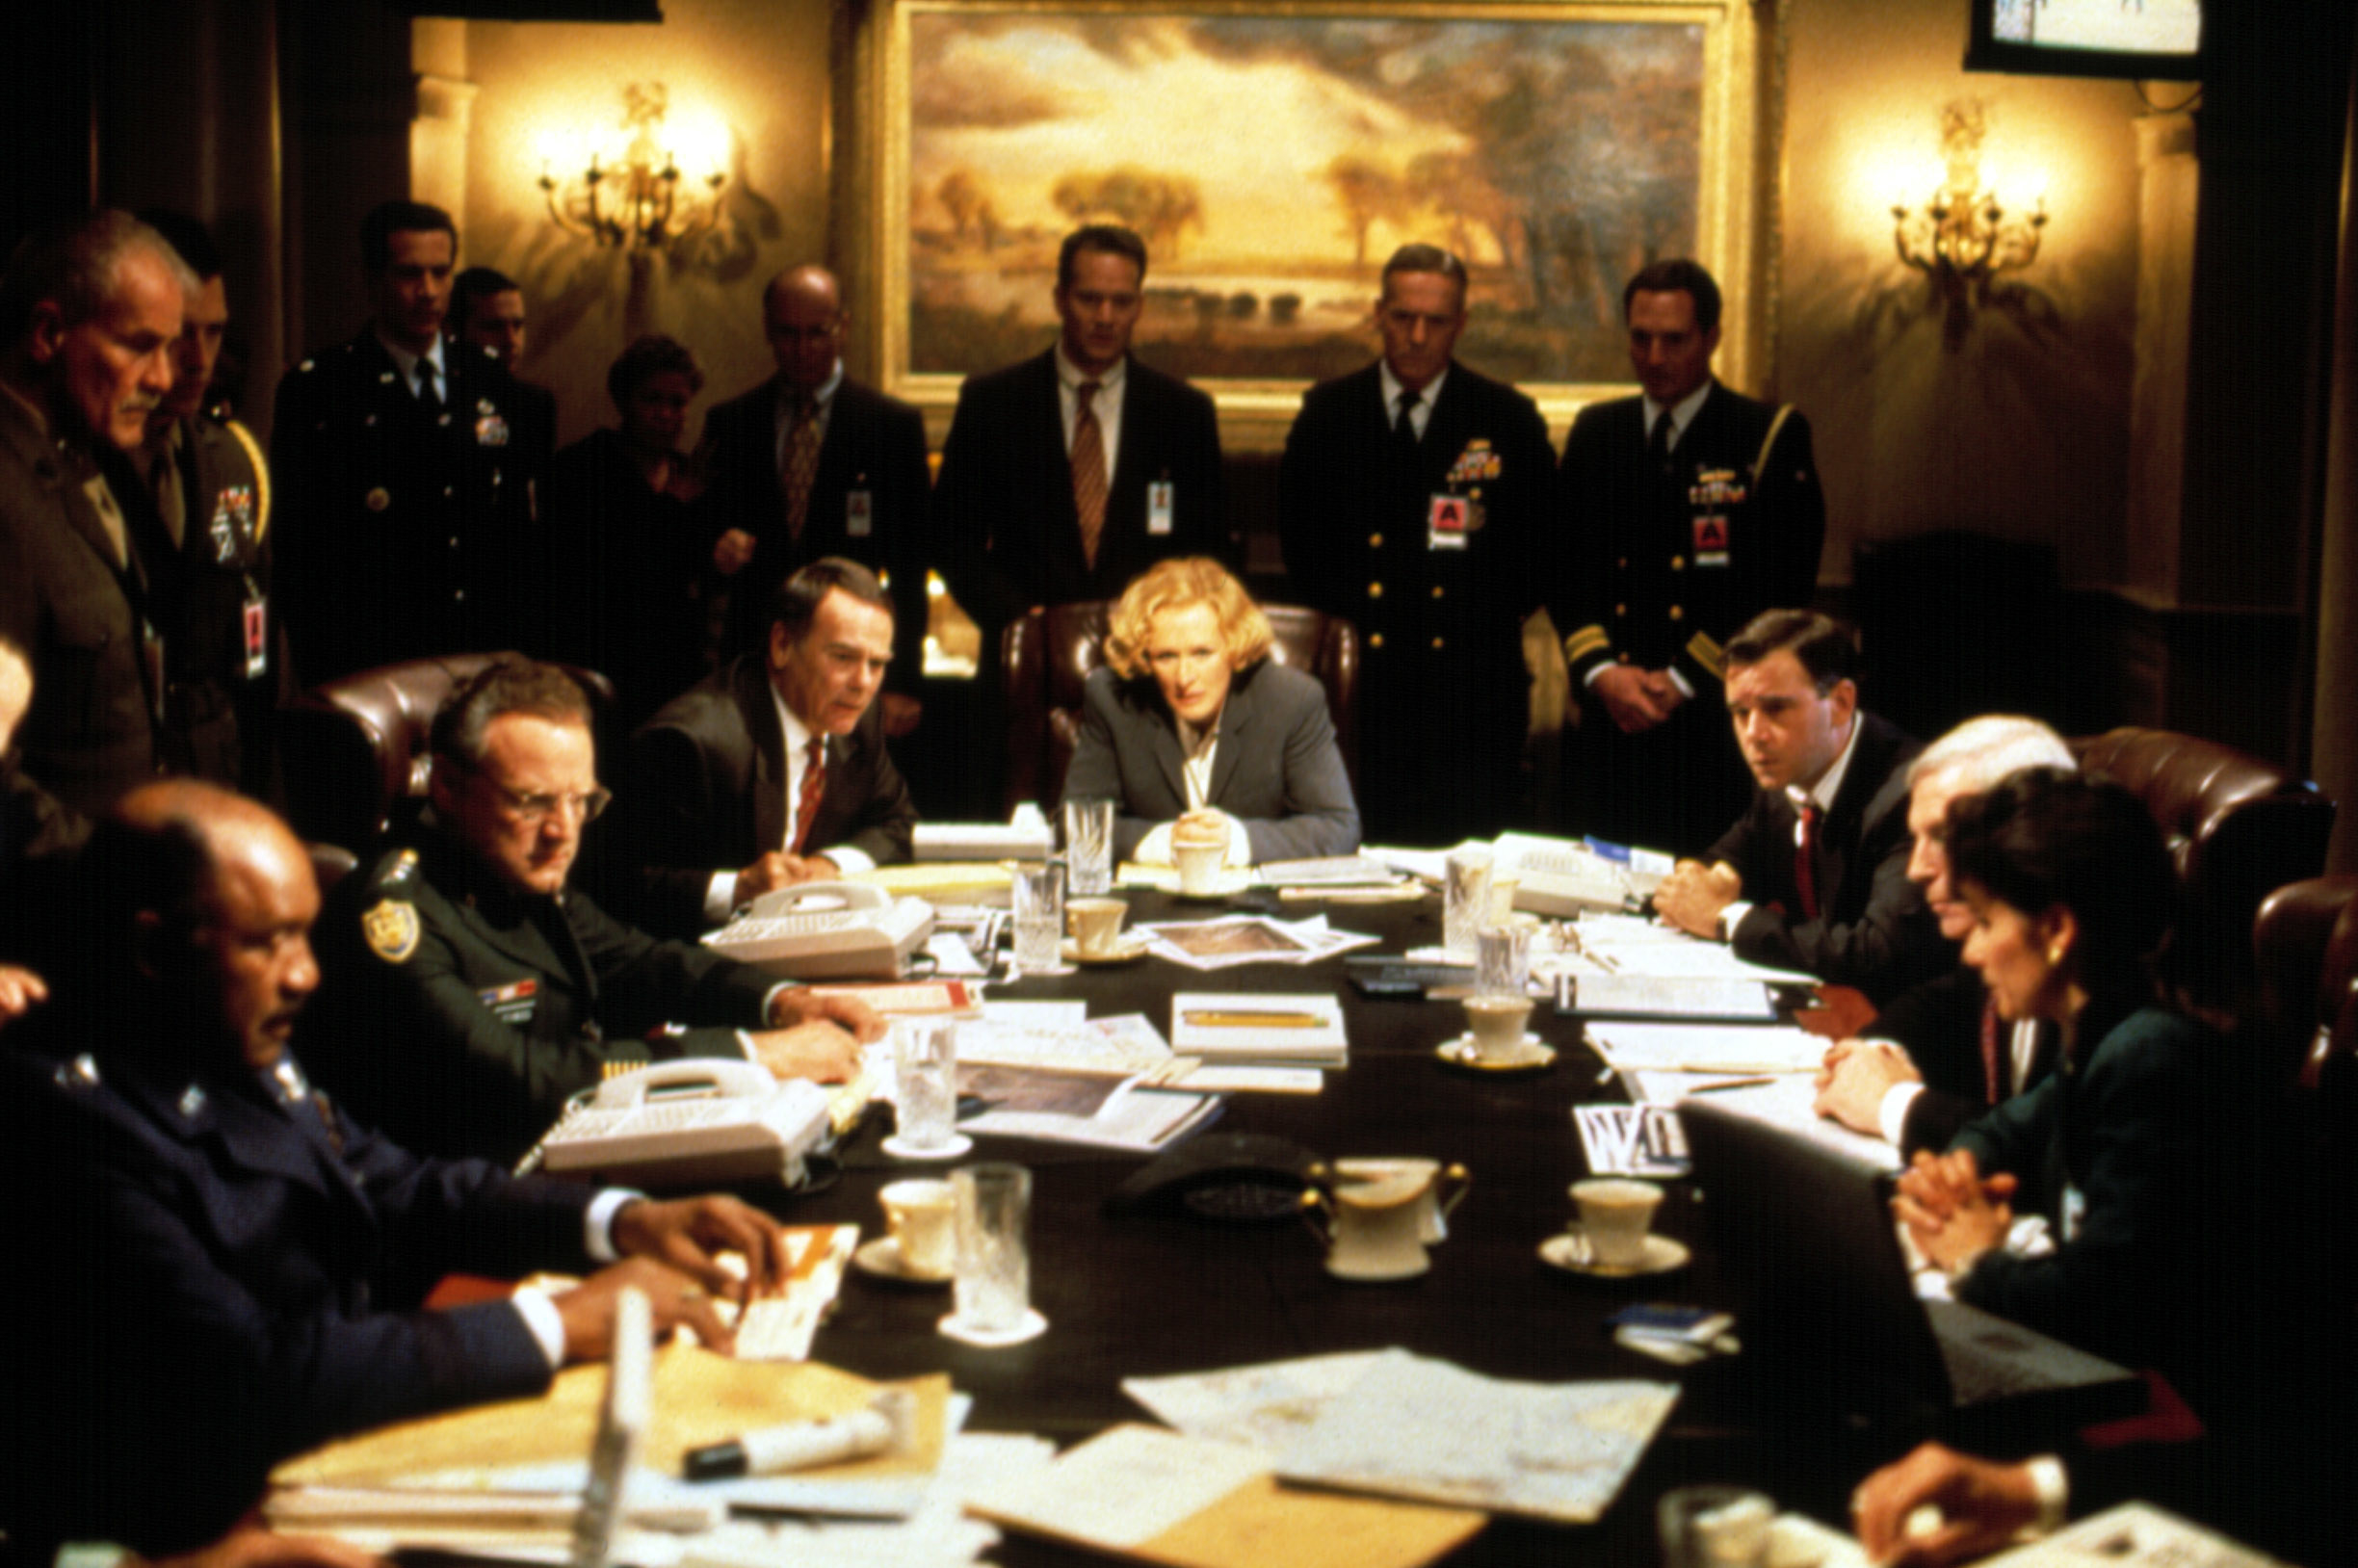 The Vice President in the situation room surrounded by advisors